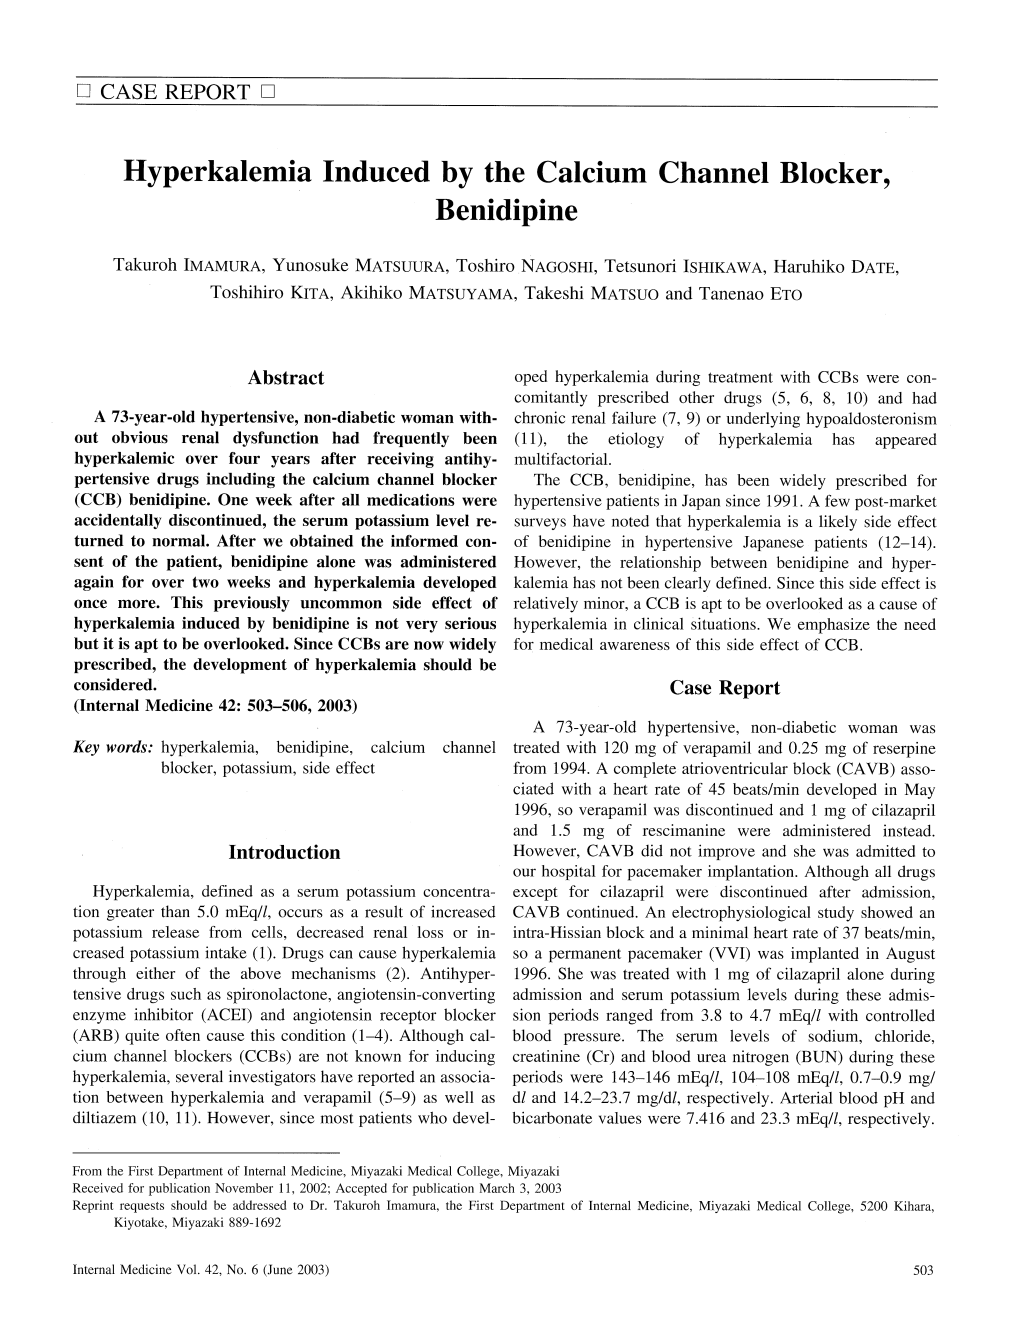 Hyperkalemia Induced by the Calcium Channel Blocker